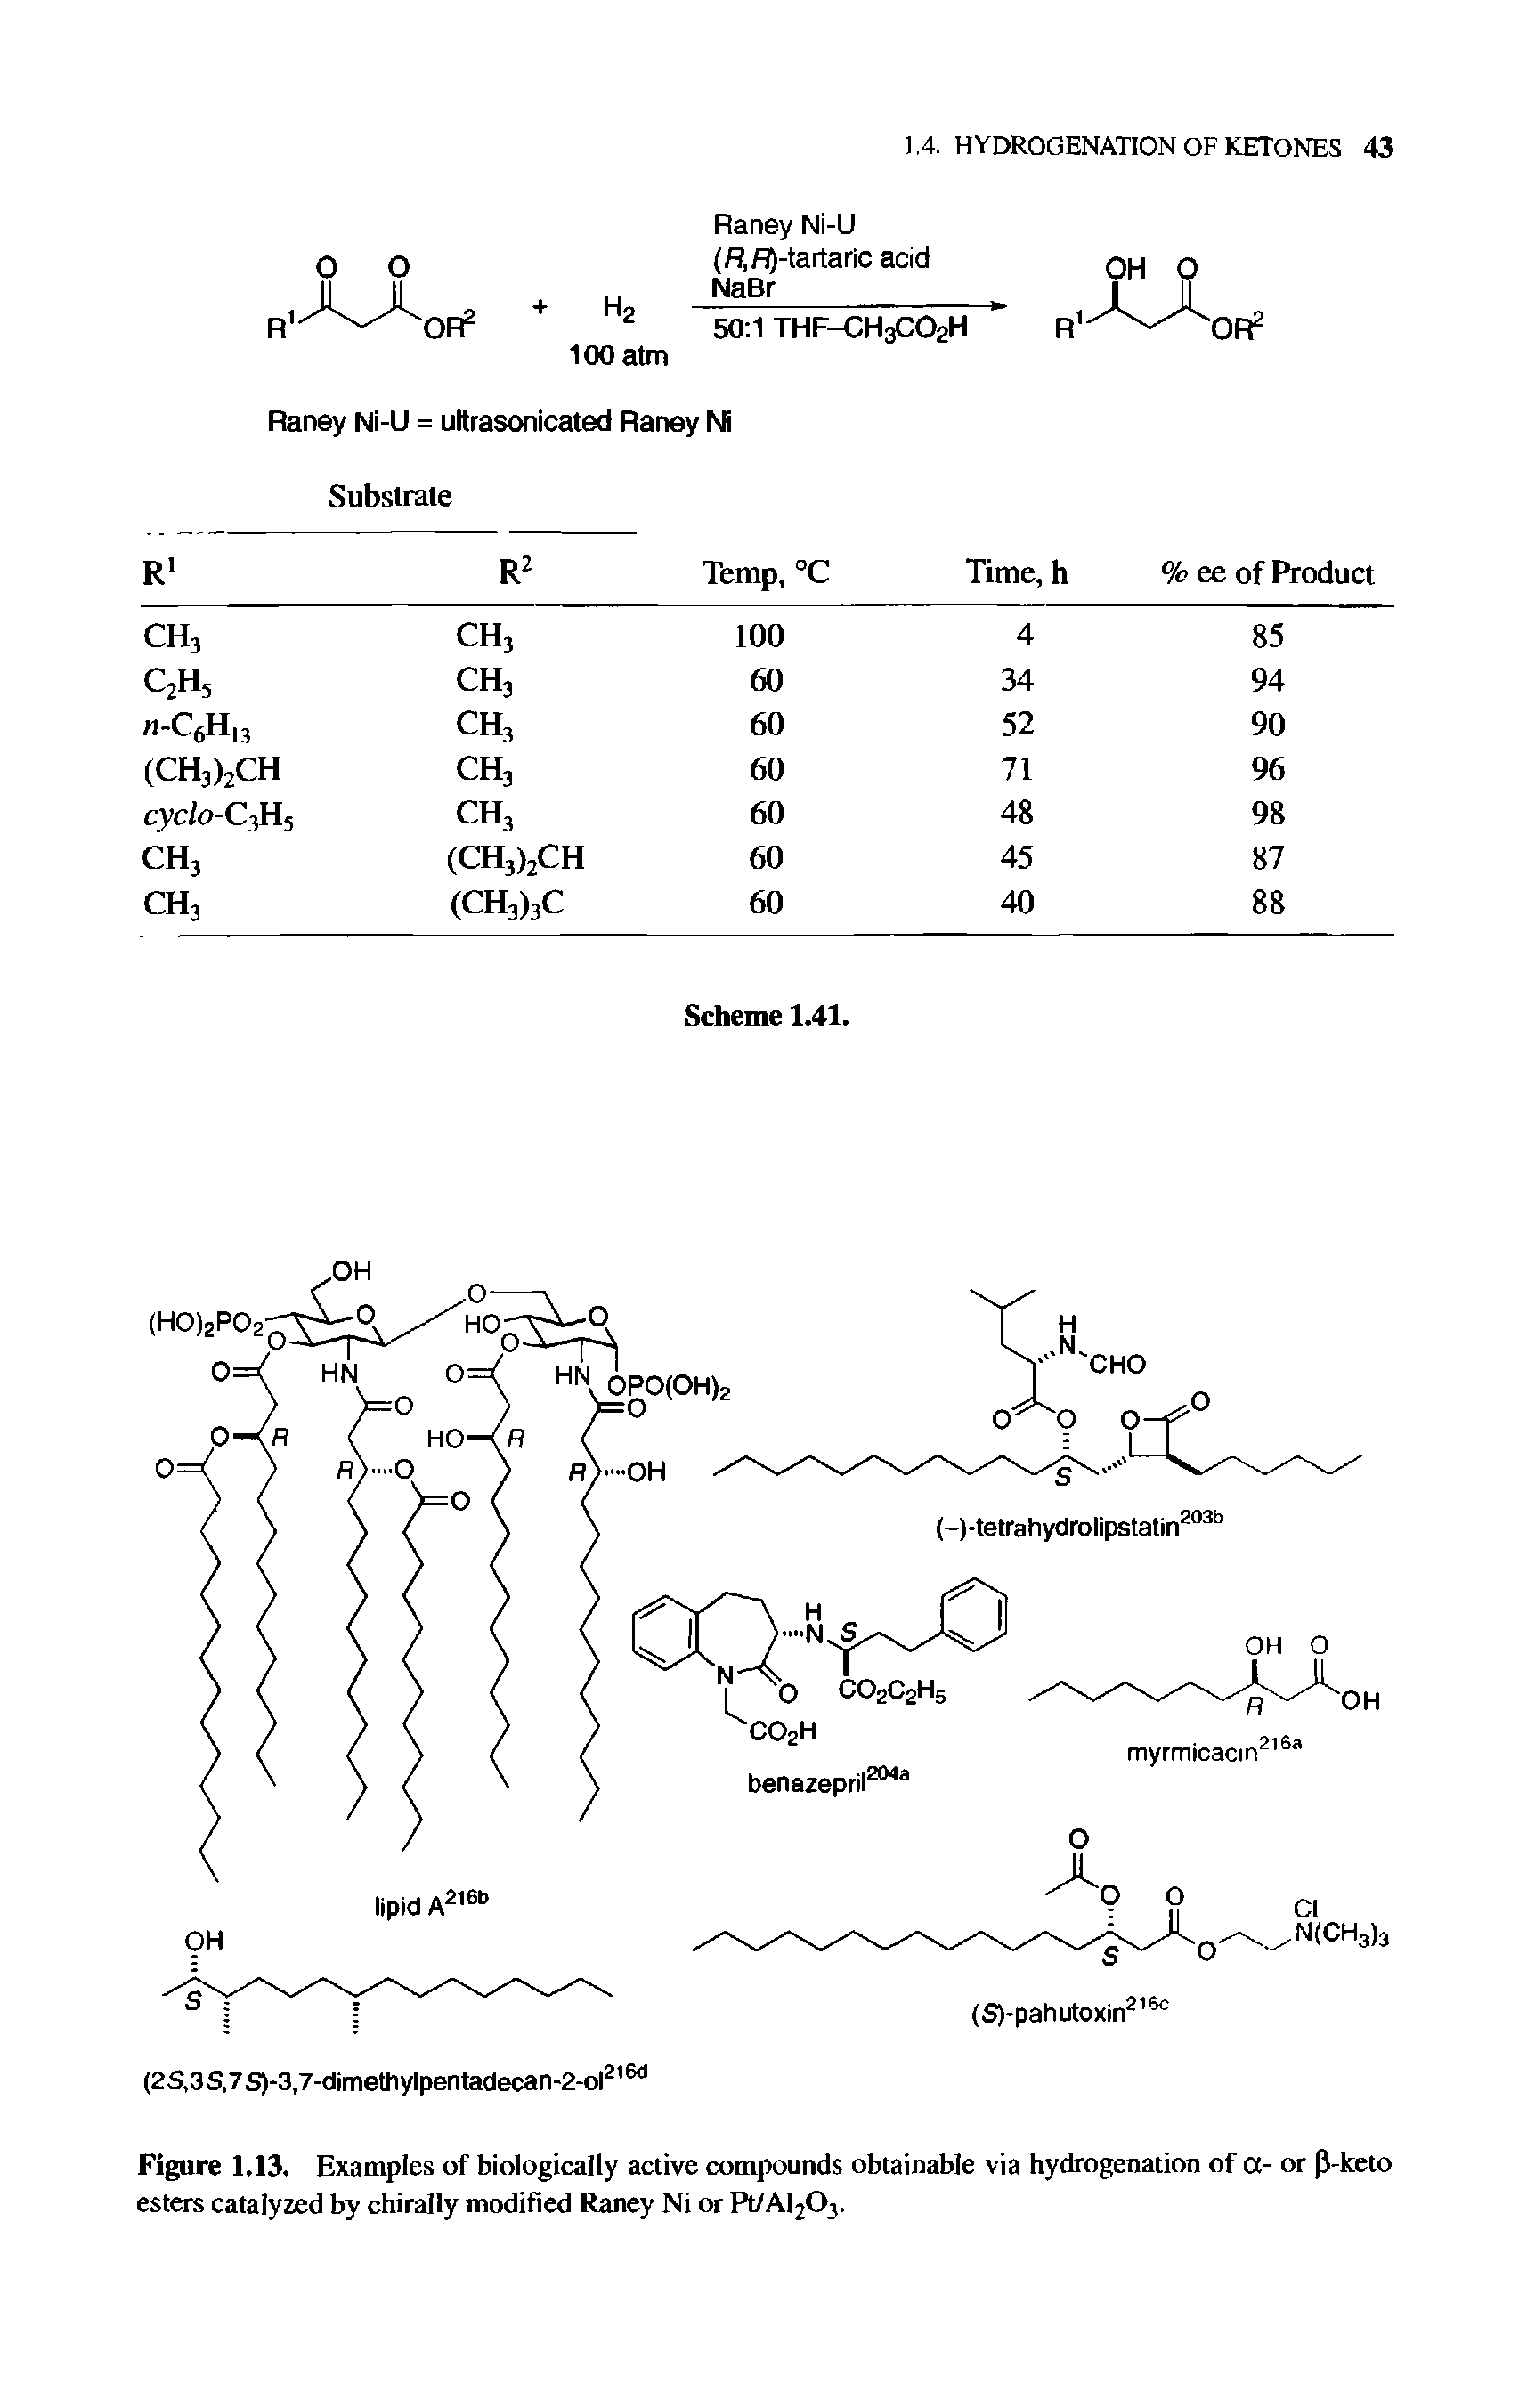 Figure 1.13. Examples of biologically active compounds obtainable via hydrogenation of a- or (5-keto esters catalyzed by chirally modified Raney Ni or Pt/Al203.